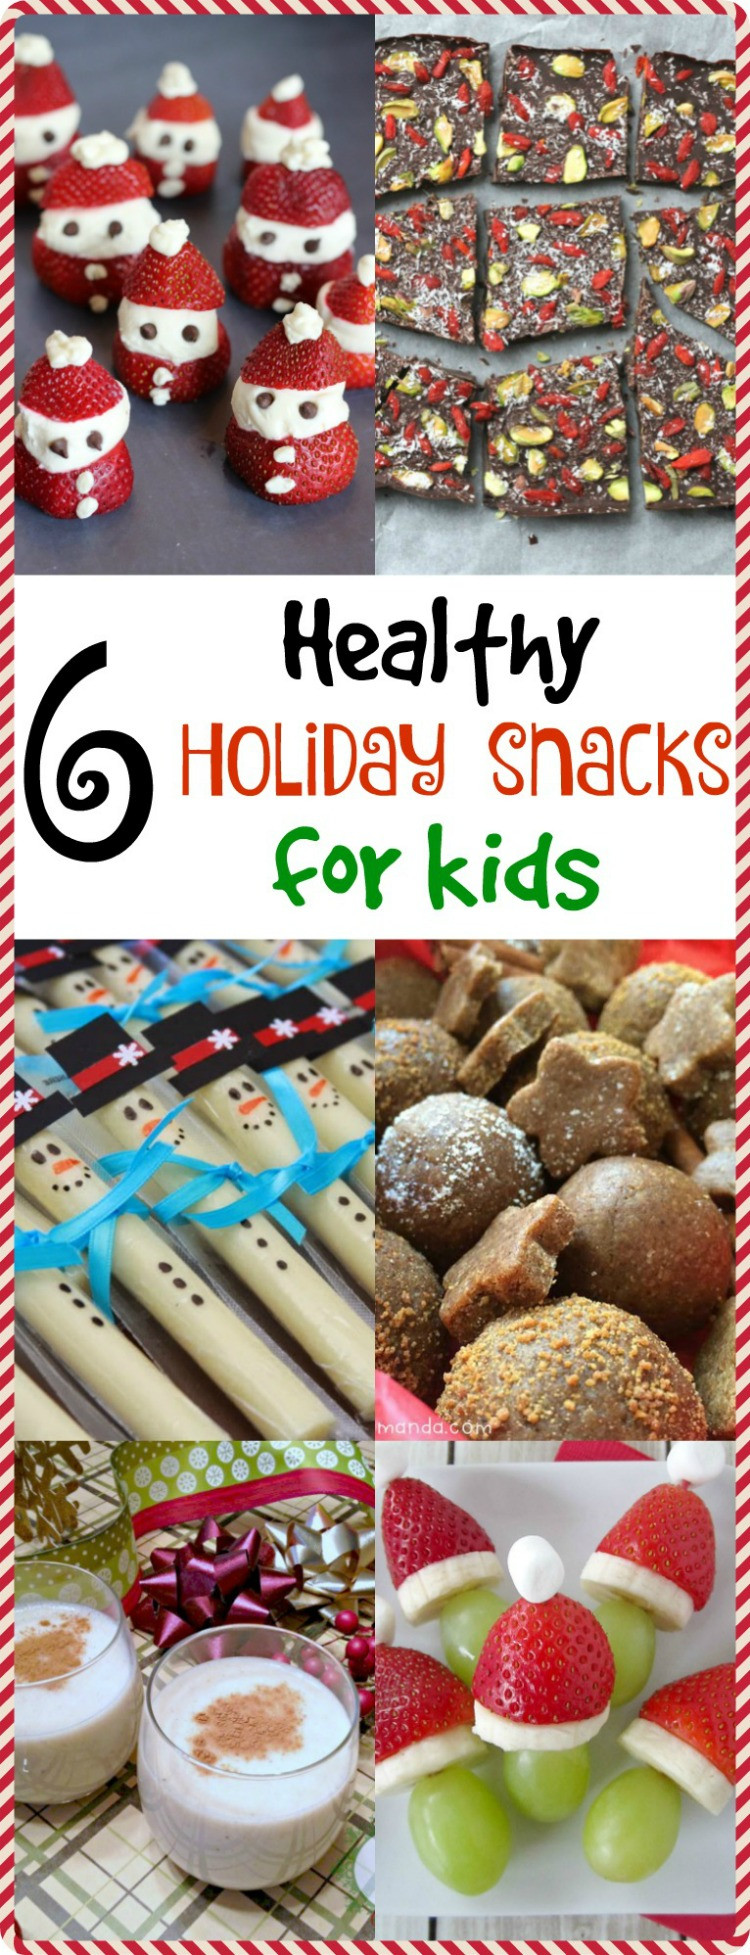 Healthy Christmas Snacks For Kids
 6 Healthy Holiday Snacks for Kids MOMables